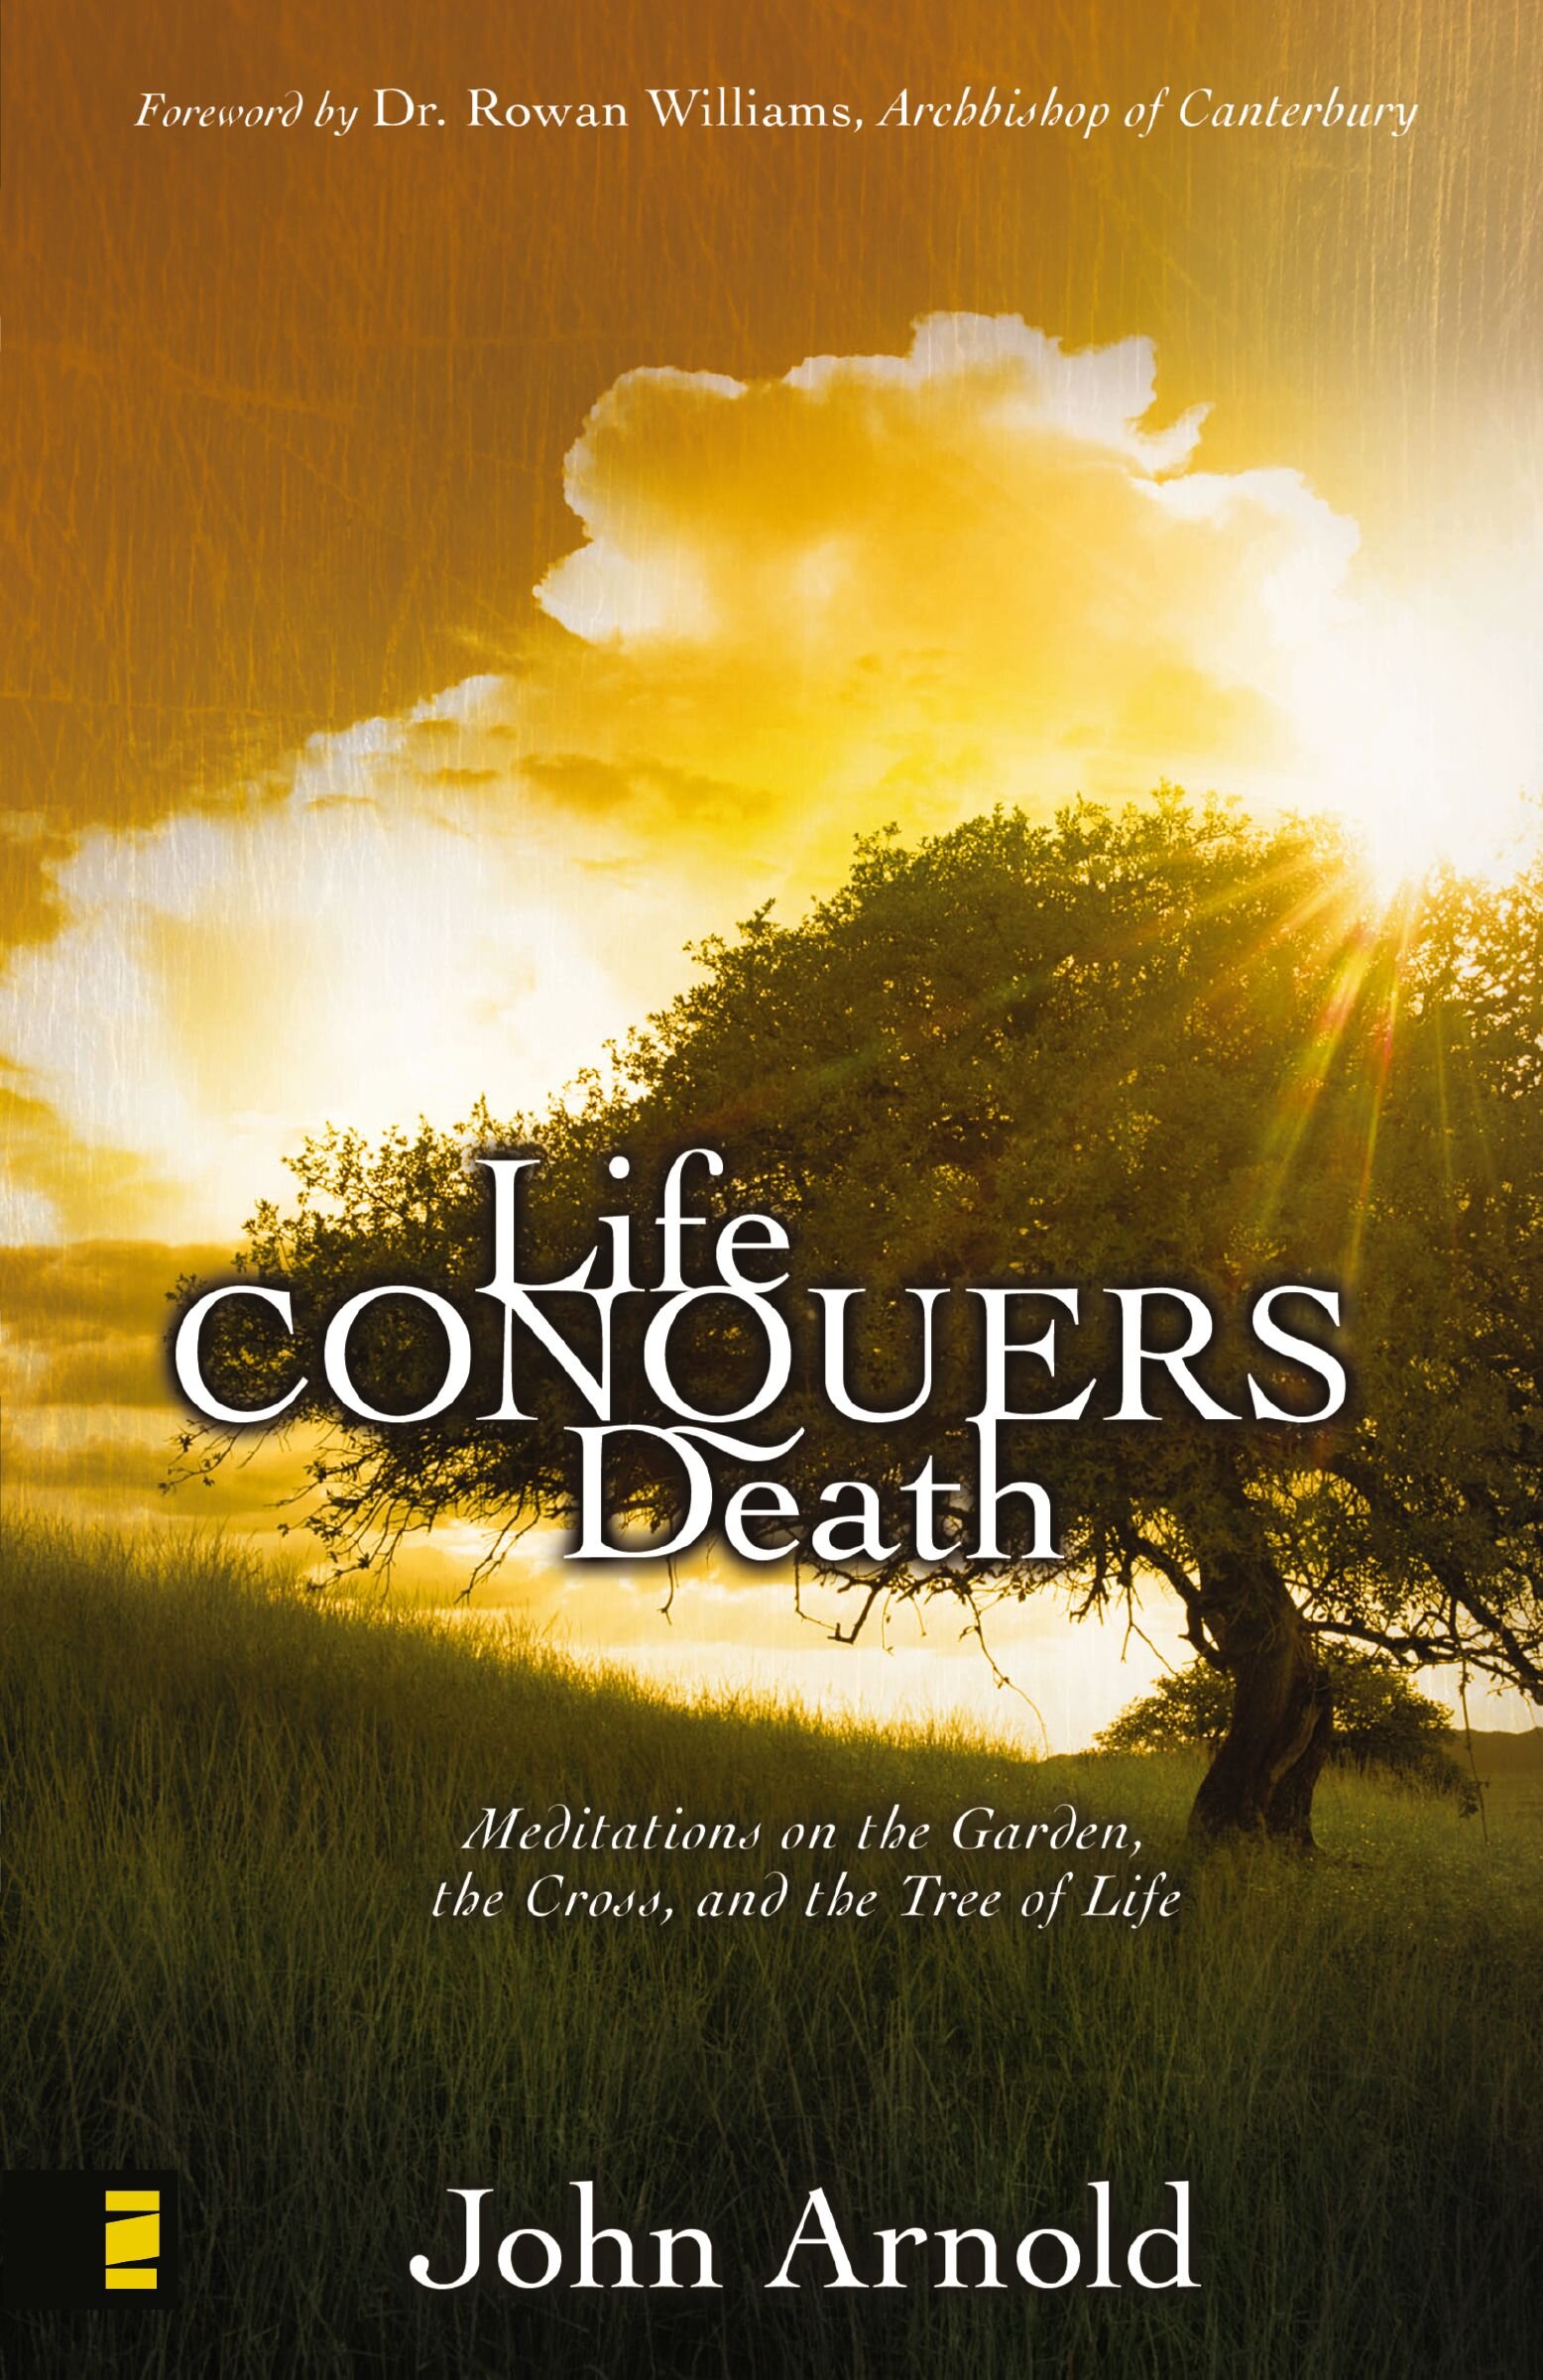 Life Conquers Death: Meditations on the Garden, the Cross, and the Tree of Life